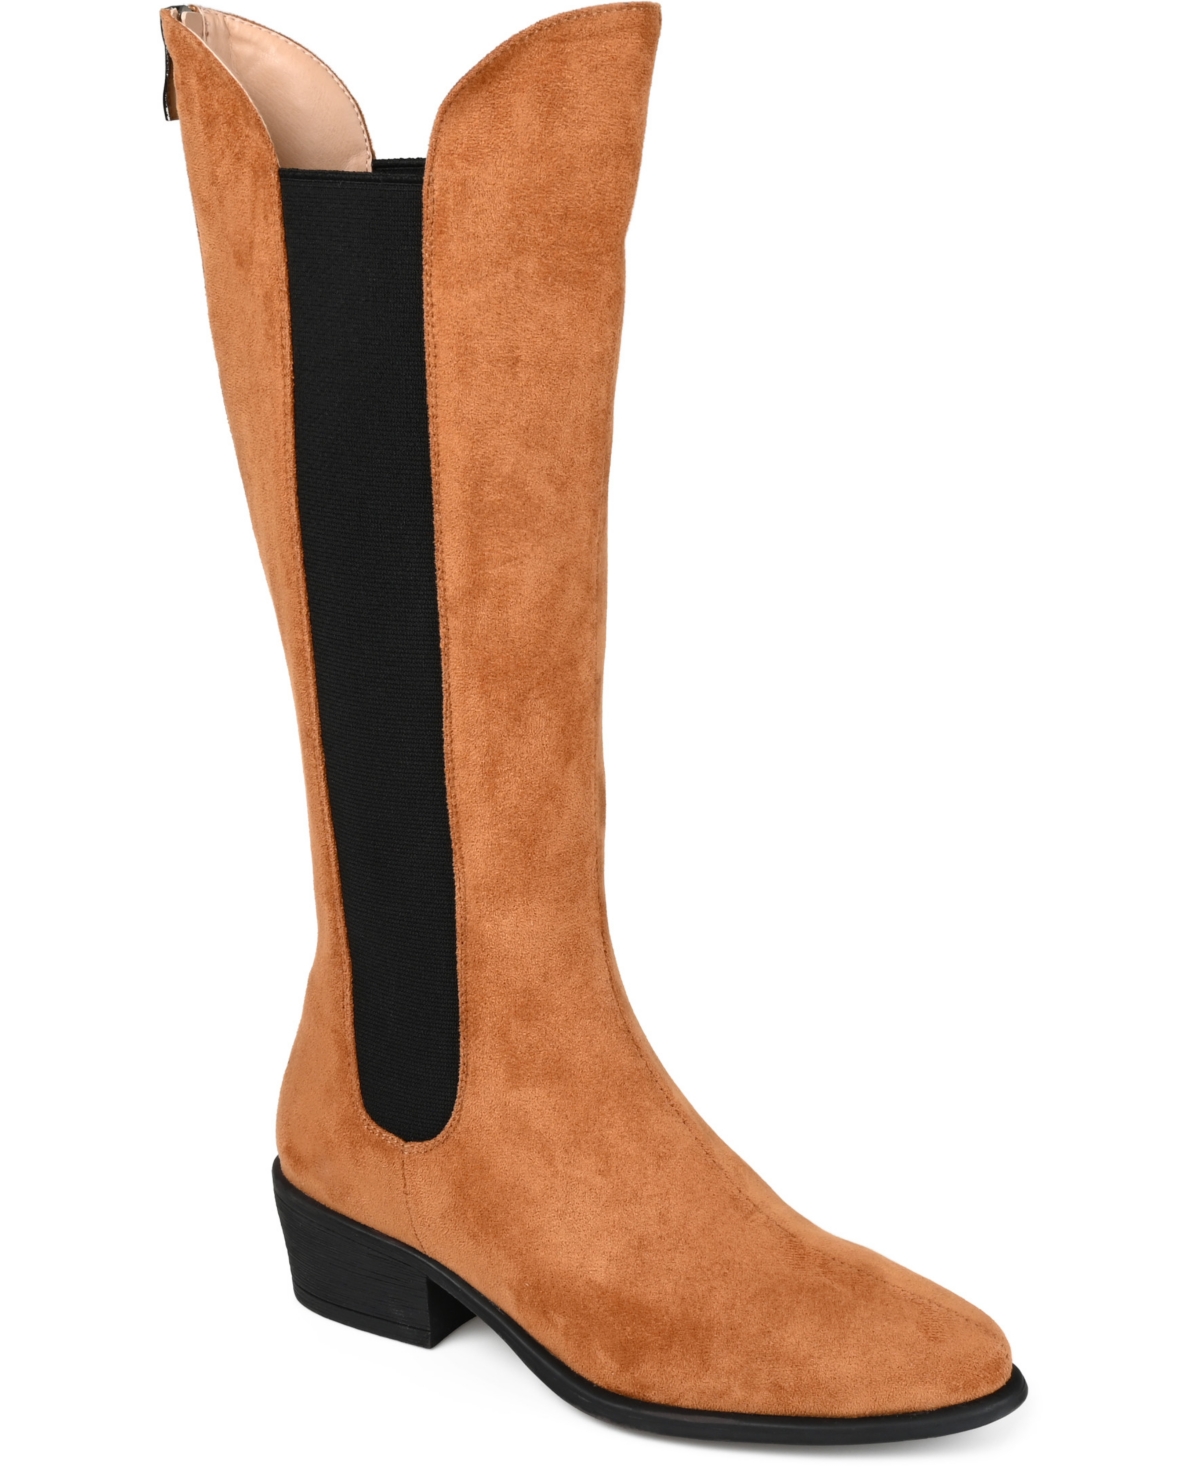 Women's Celesst Boots - Taupe